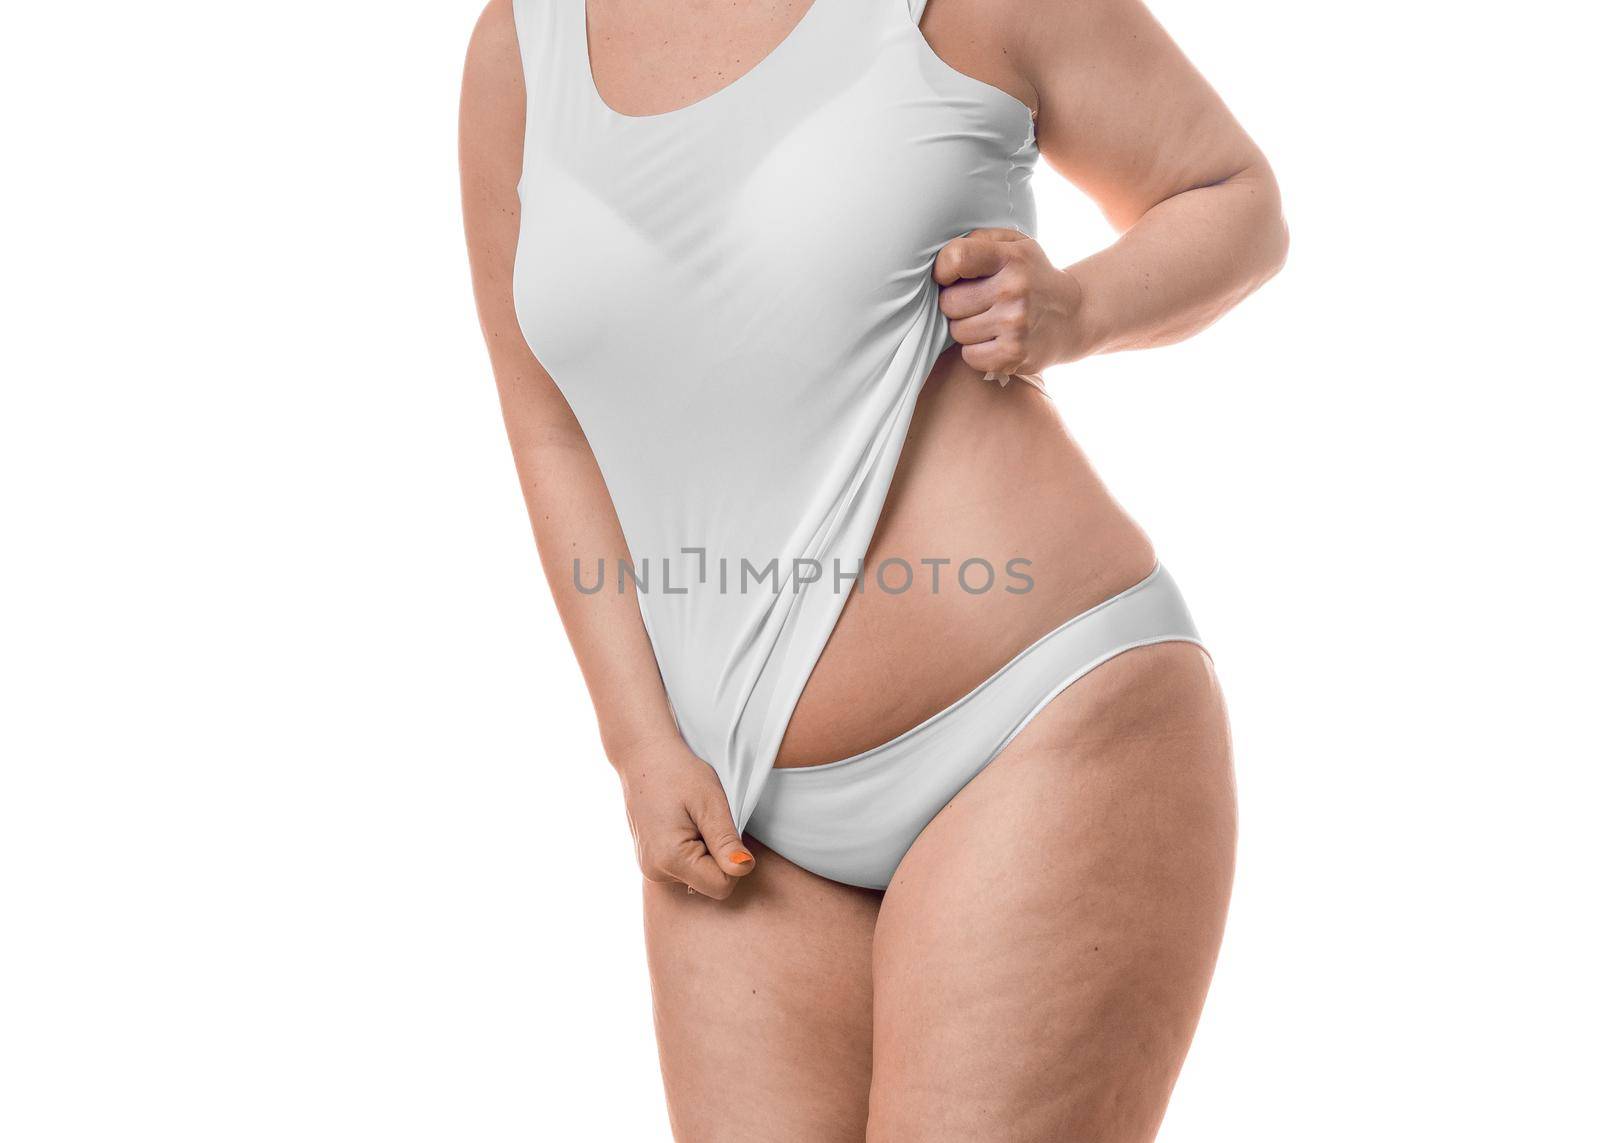 Close up photo of a fat woman showing her waist - isolated over white background. Slimming concept.